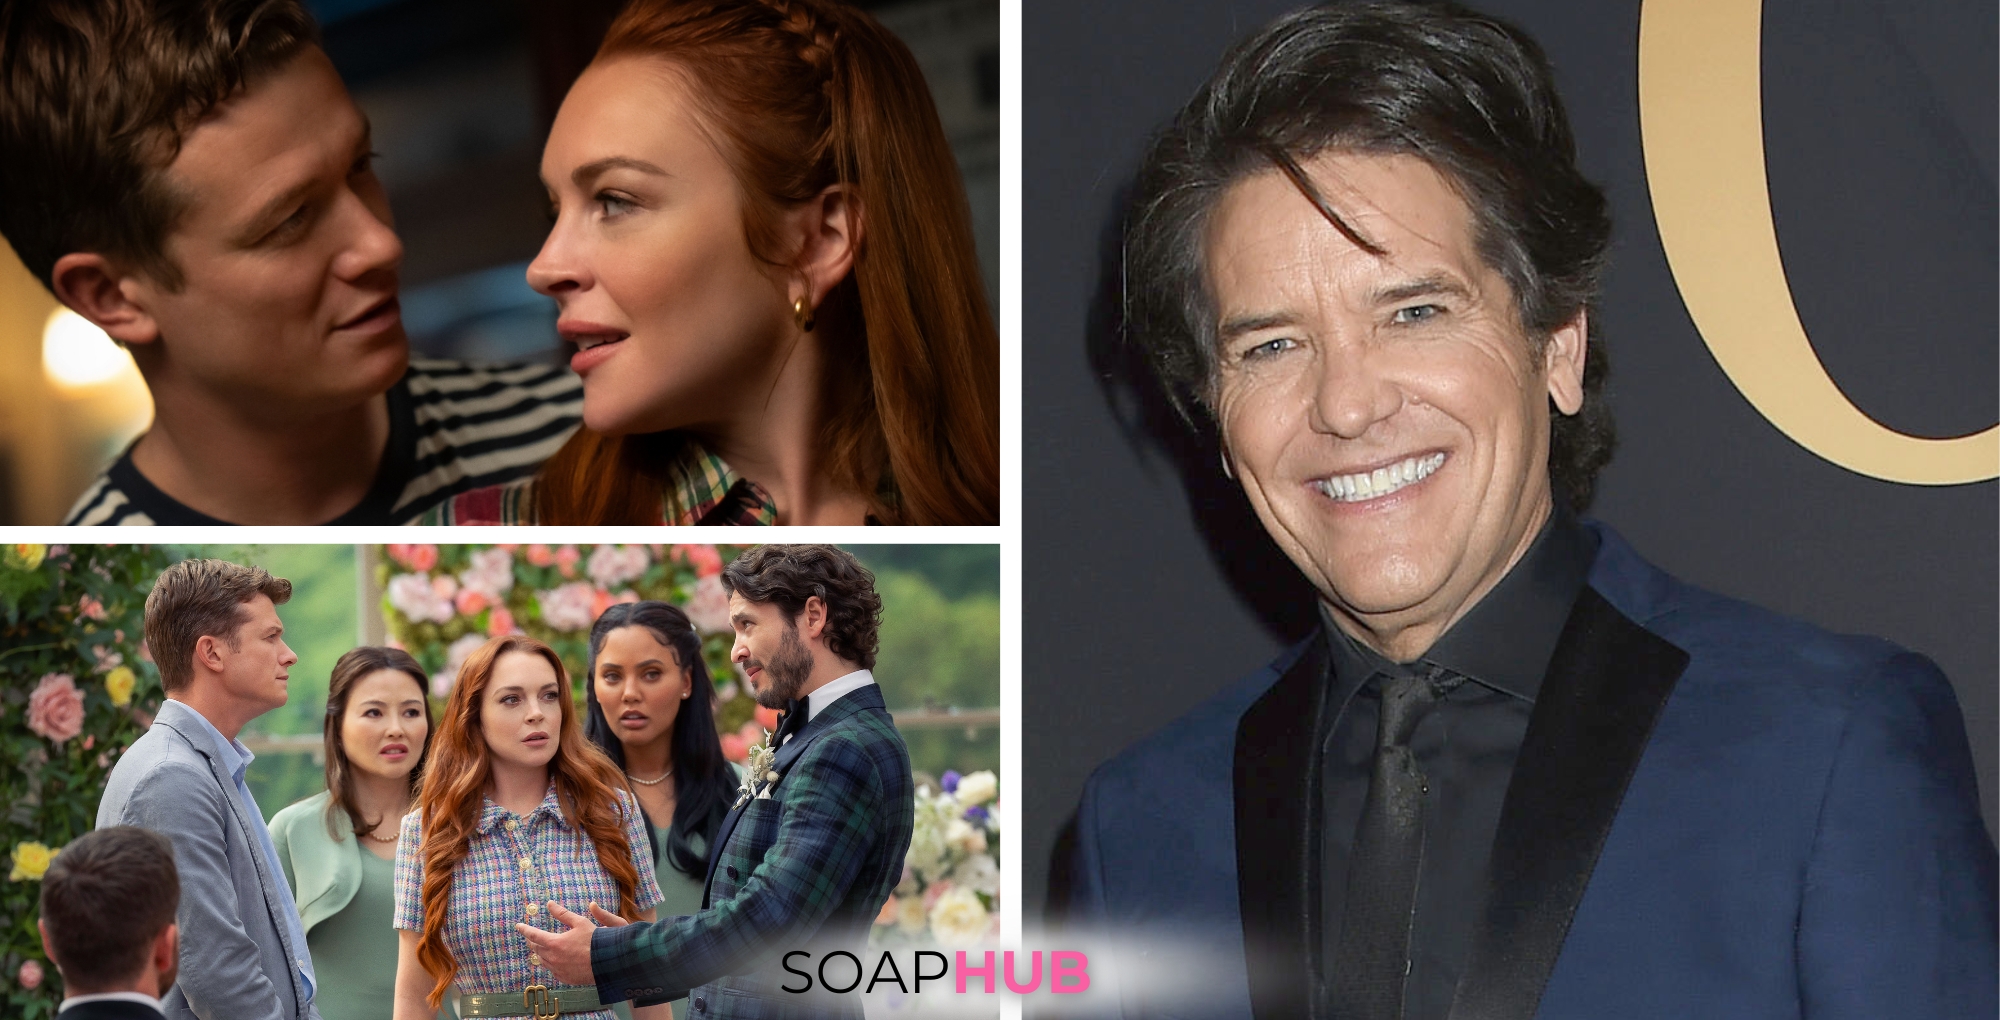 Scenes from Michael Damian's new movie with Linsey Lohan, Michael Damian, and a Soap Hub logo across the bottom.